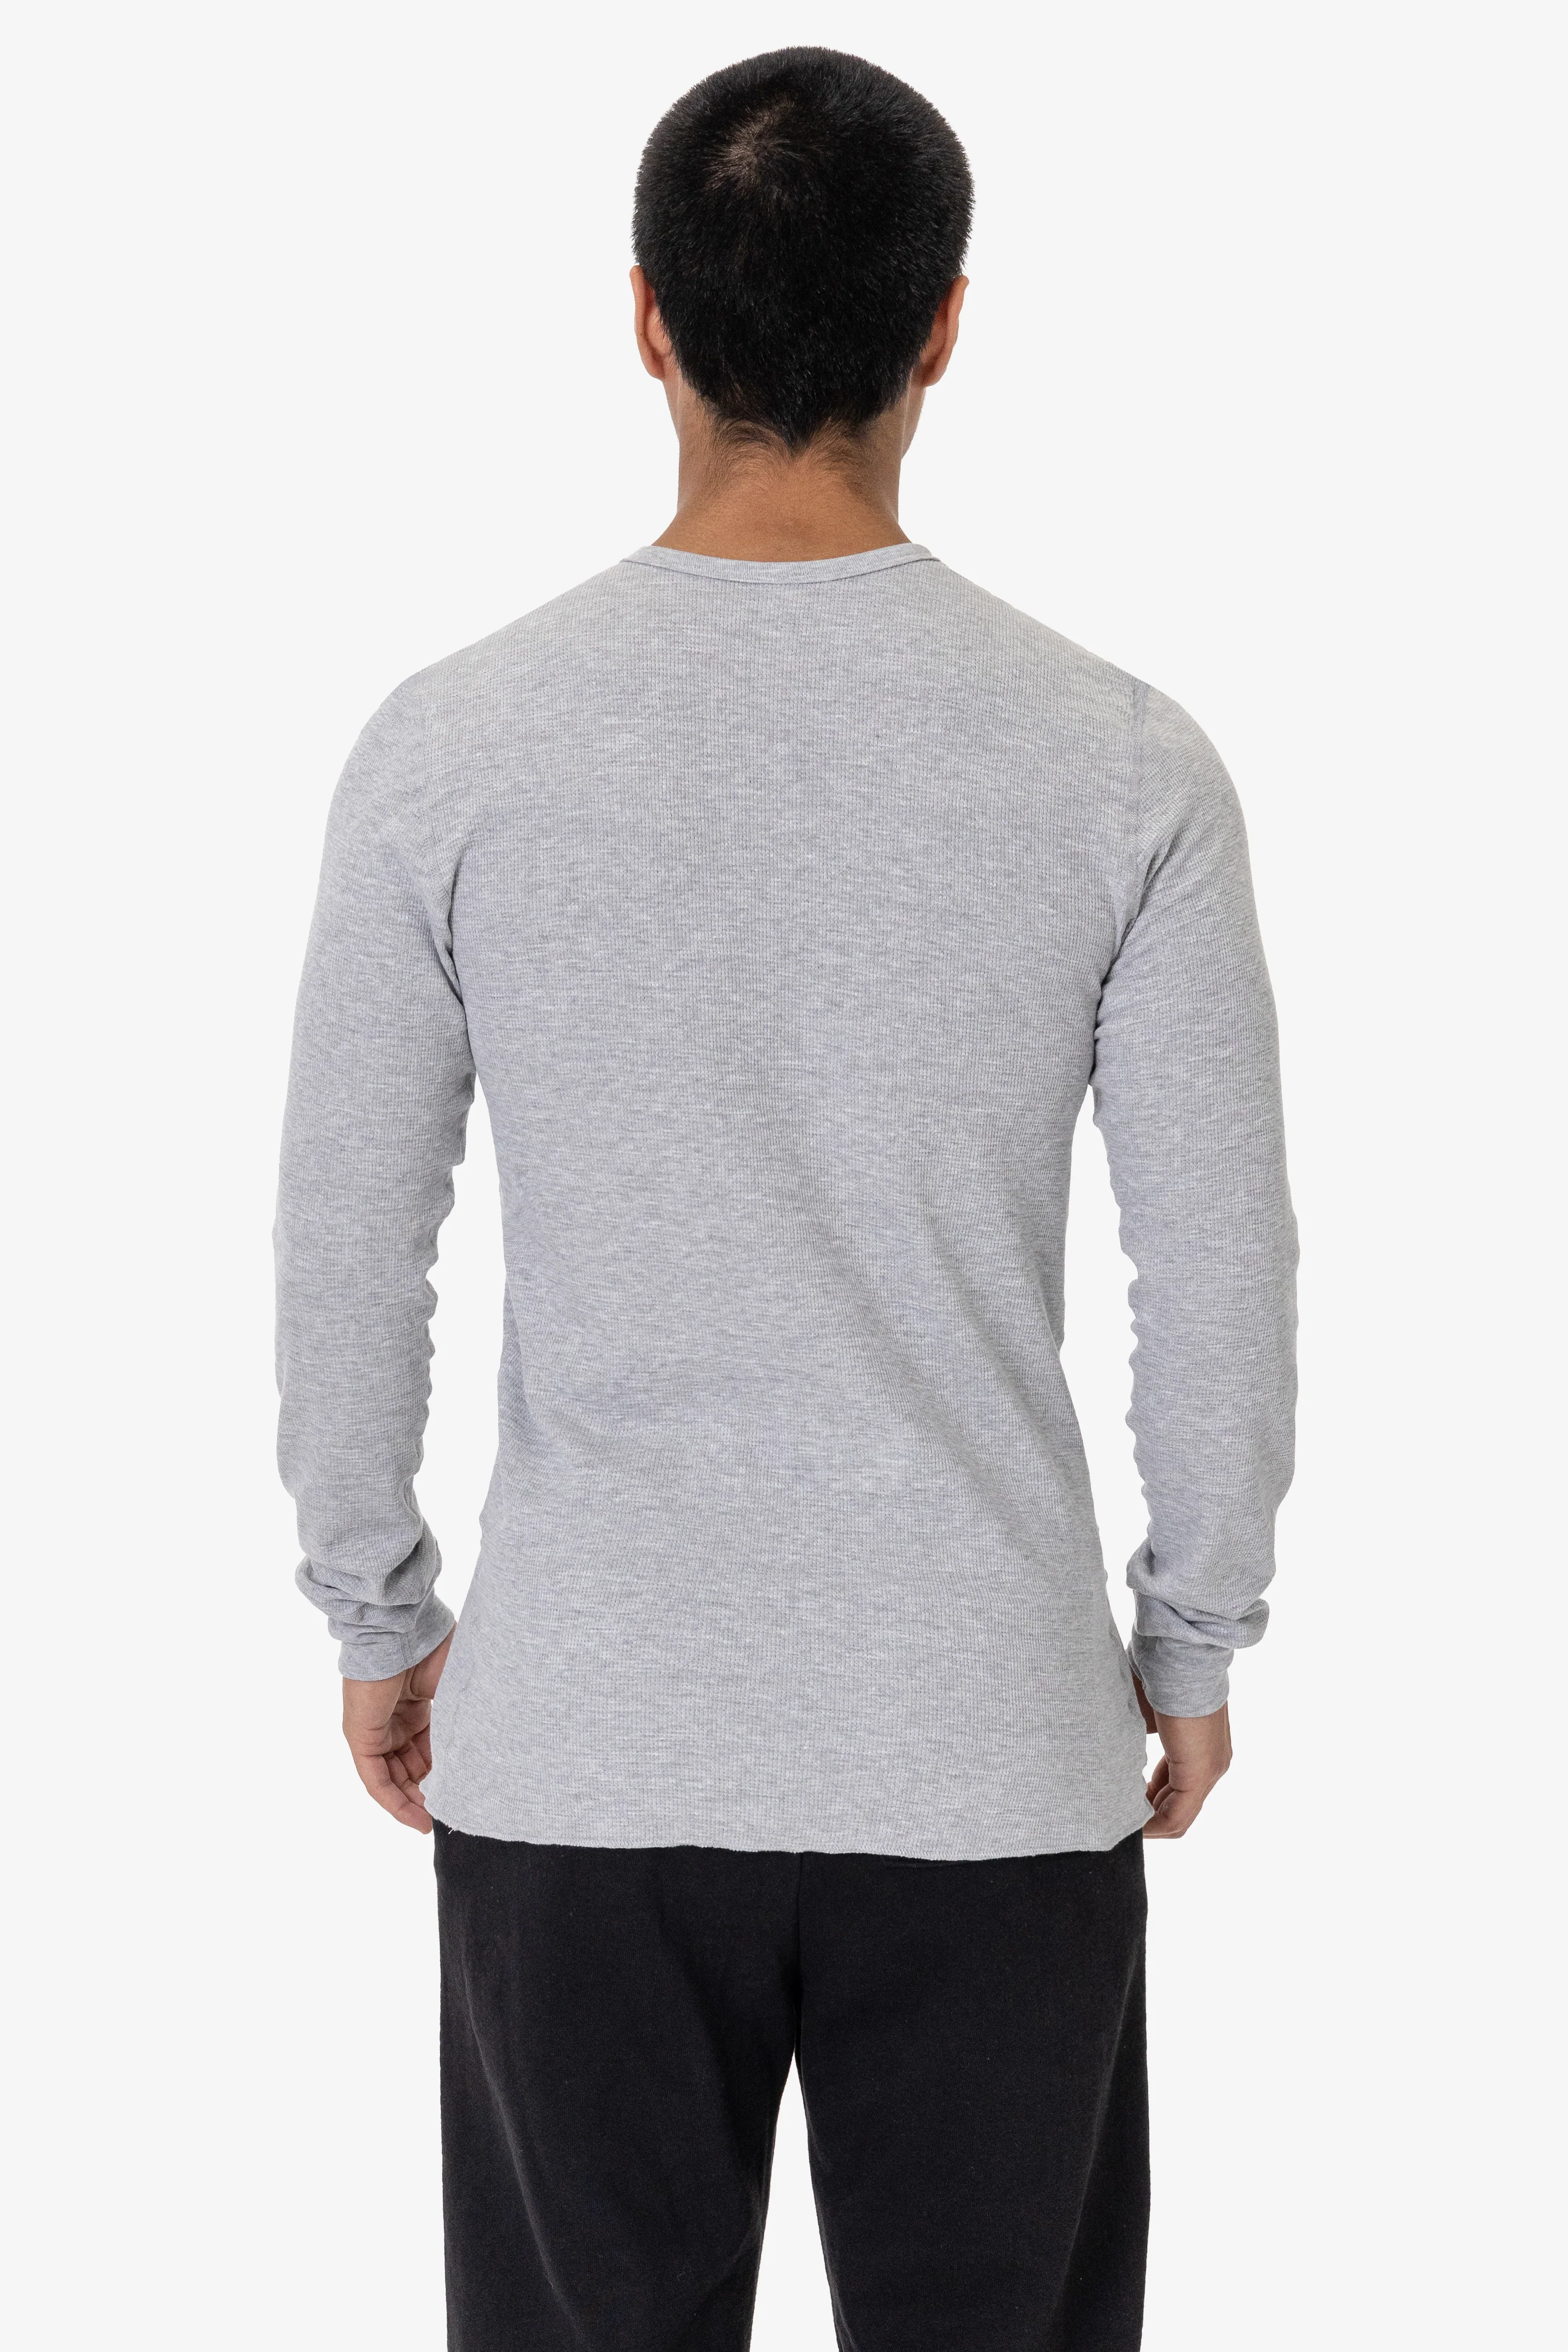 los angeles apparel L/S Baby Thermal Henley